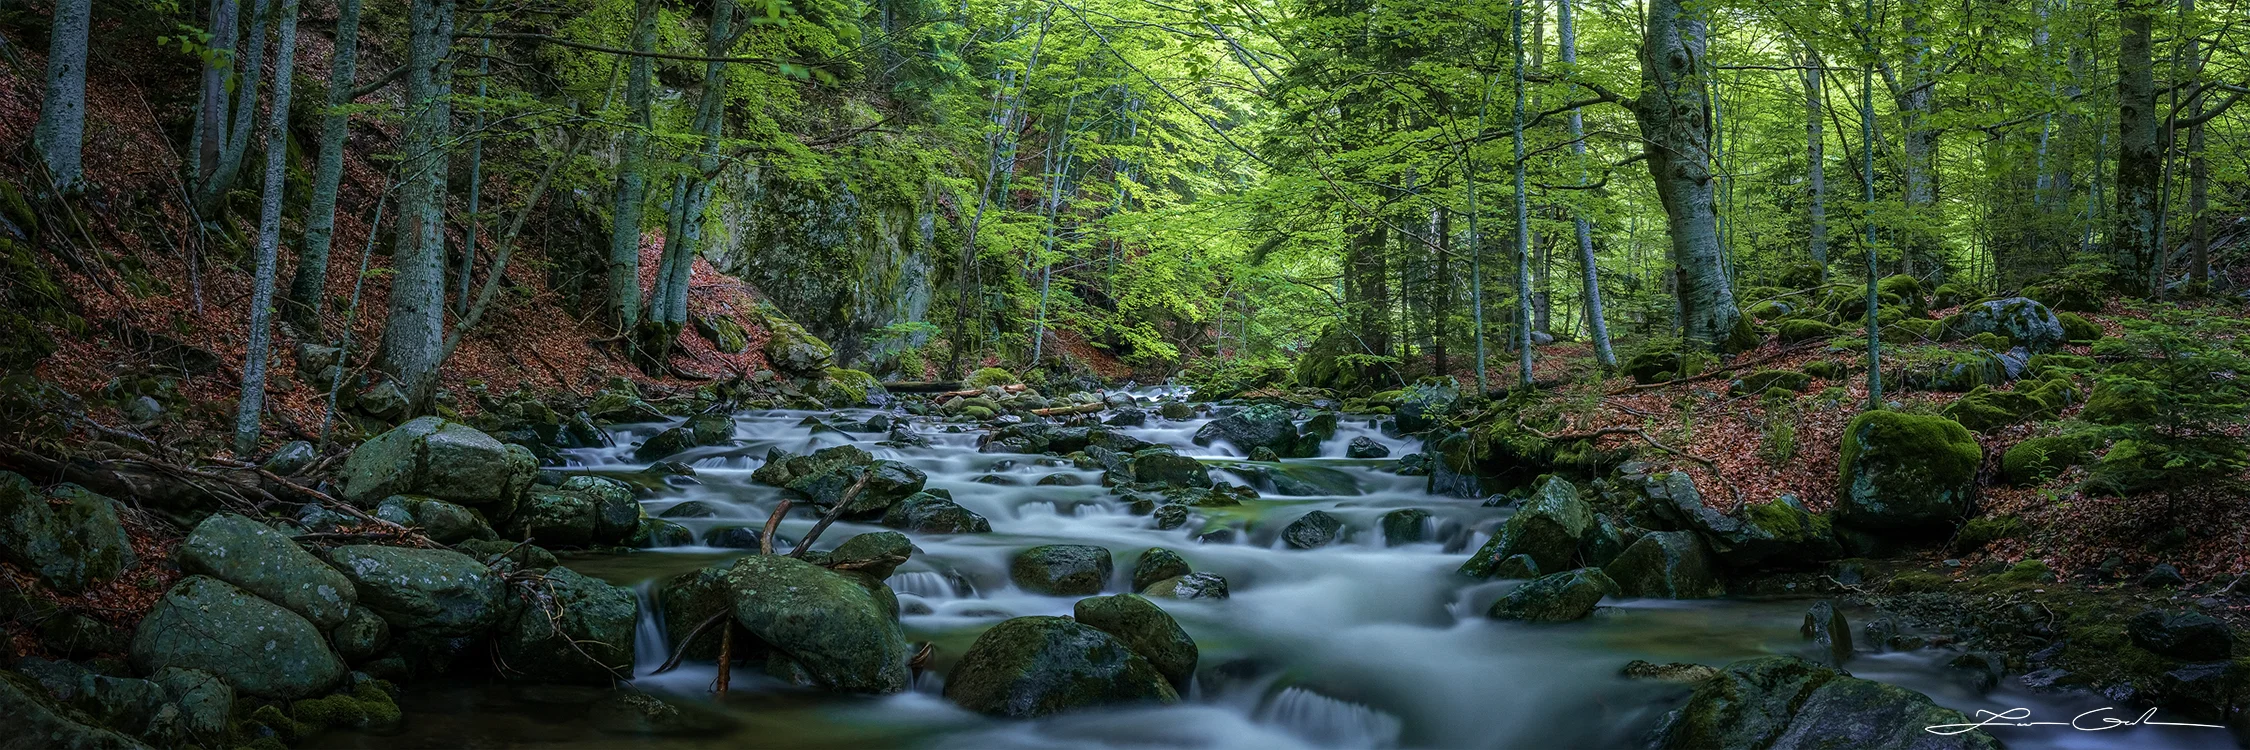 "Rejuvenation," a fine art photo print depicting a tranquil forest river flowing smoothly over rounded stones amidst verdant trees and moss-covered rocks, capturing the essence of a peaceful woodland ecosystem. - Gintchin Fine Art